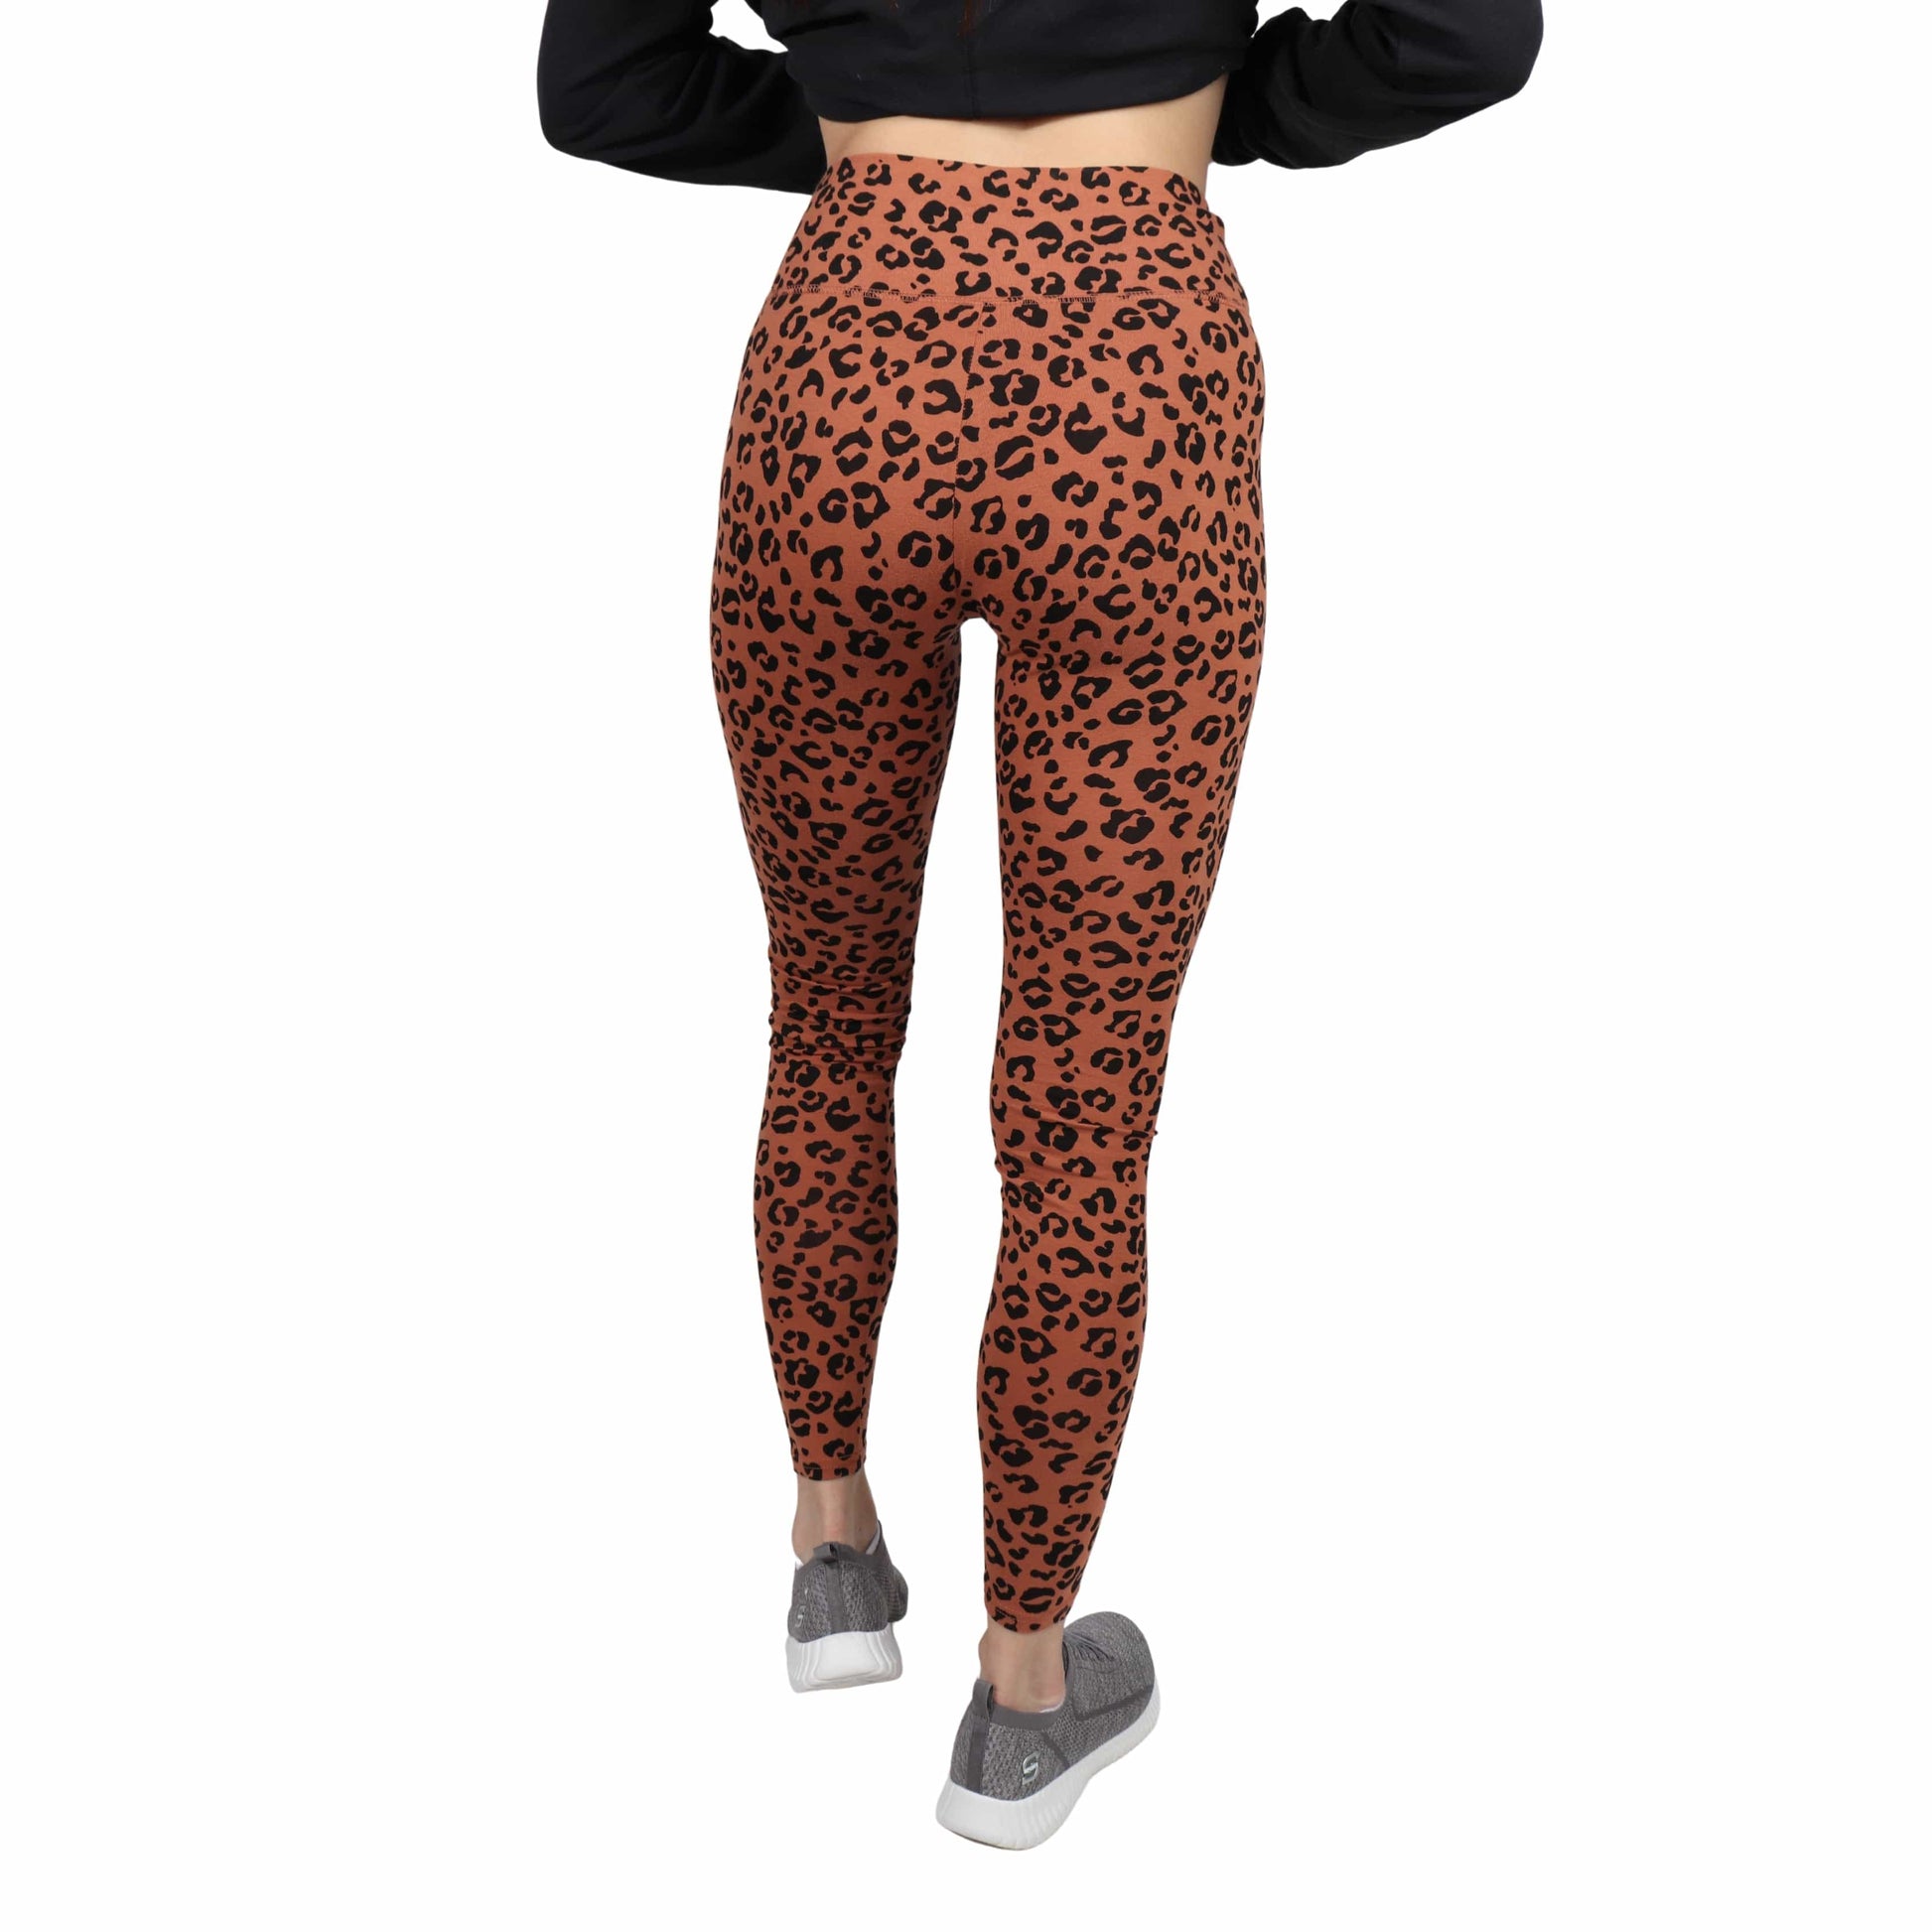 Athletic Leggings By Wild Fable Size: S